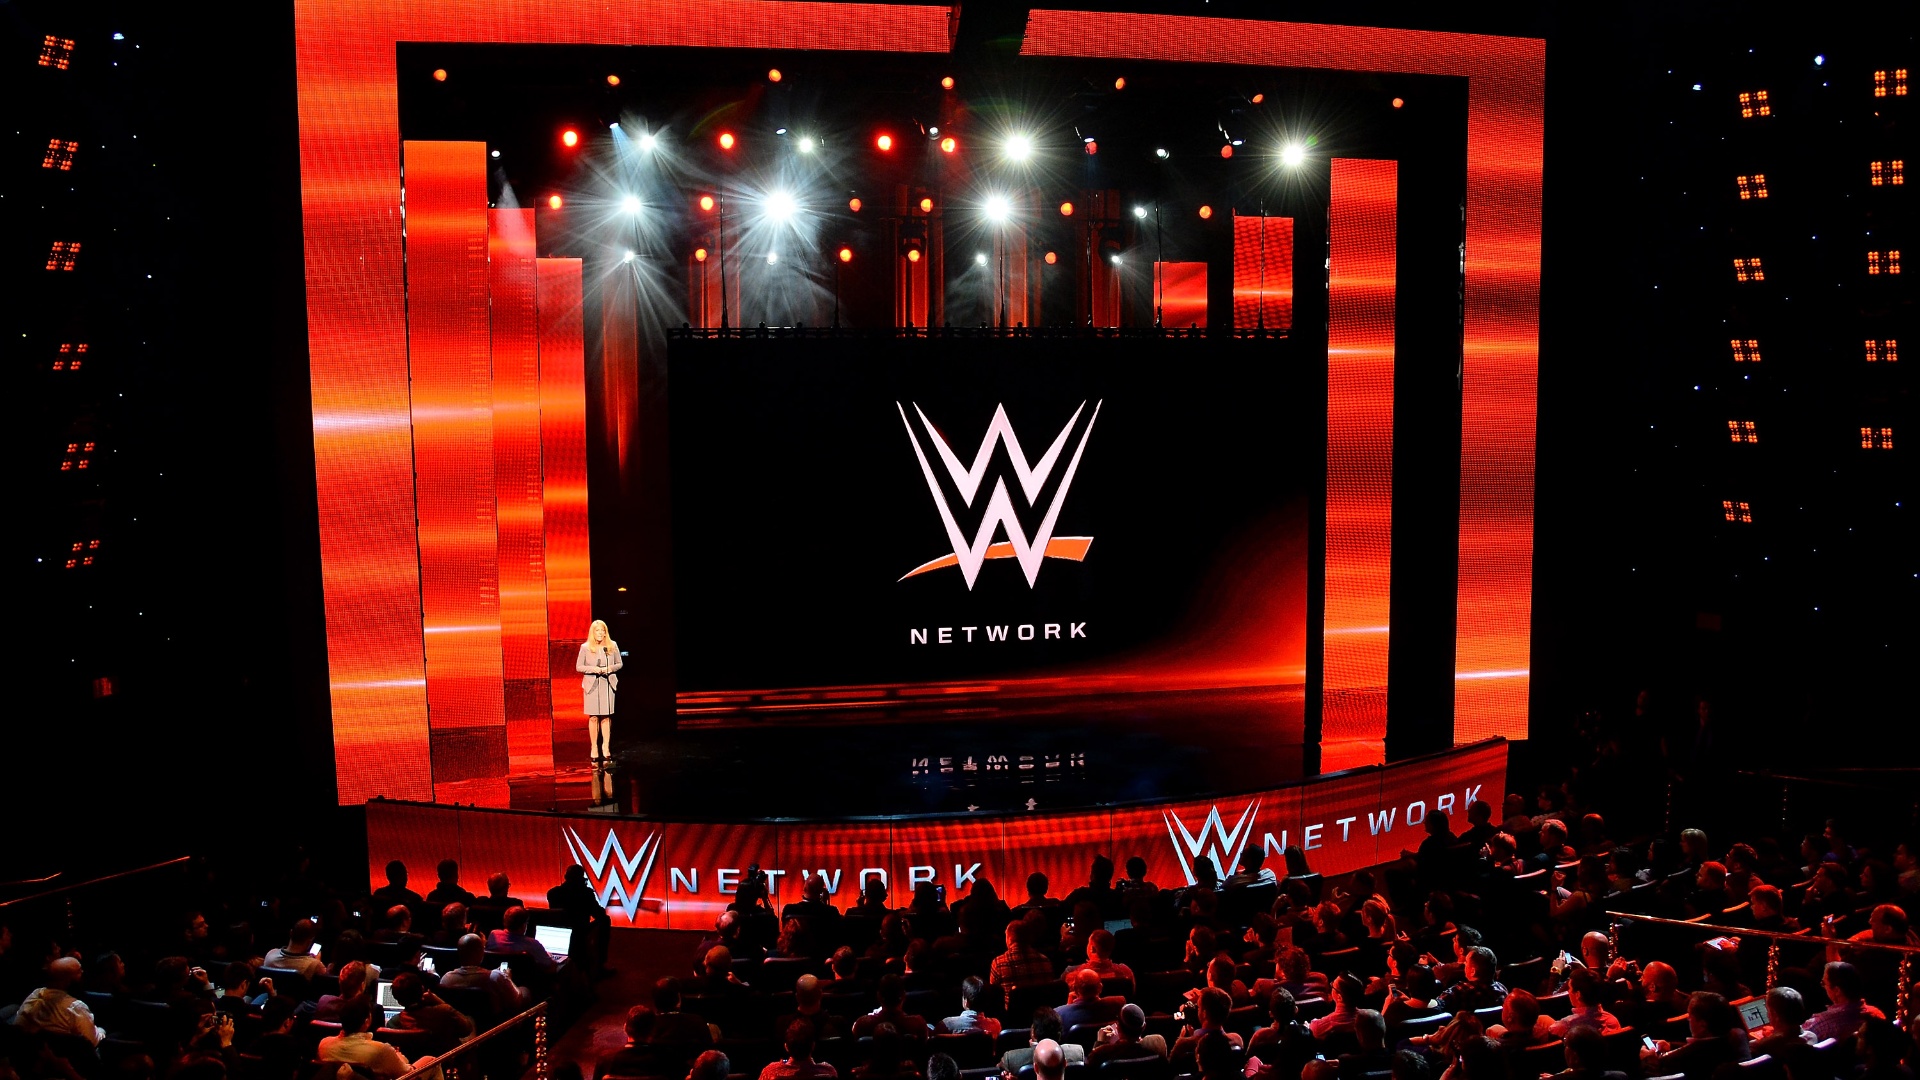 Peacock Streaming Service to Become Exclusive Home of WWE Network in U.S.